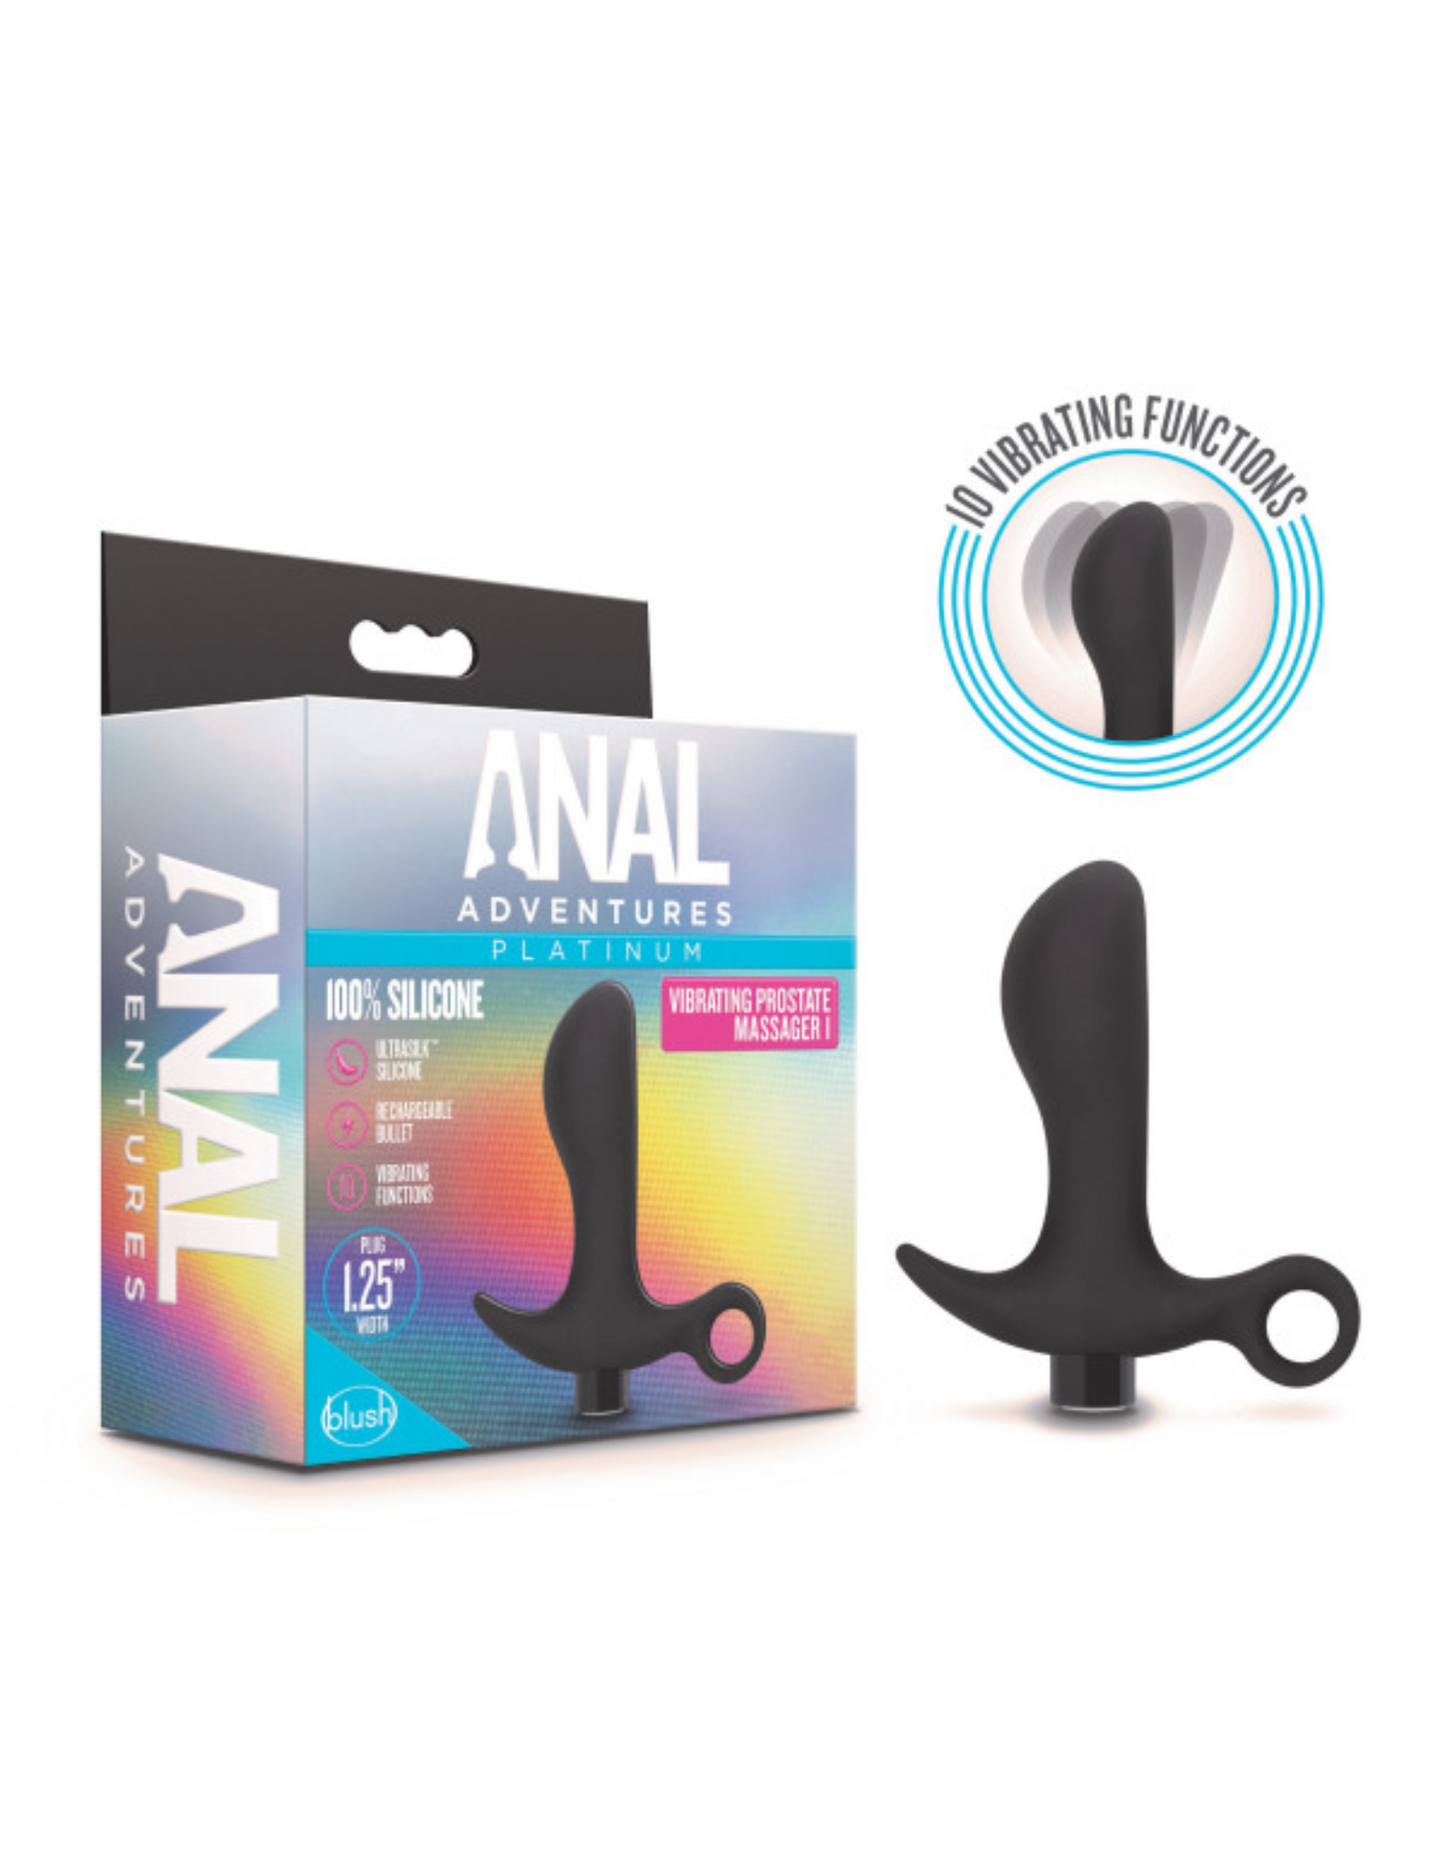 Photo shows the Anal Adventures Platinum Rechargeable Vibrating Prostate Massager from Blush box with the product next to it.